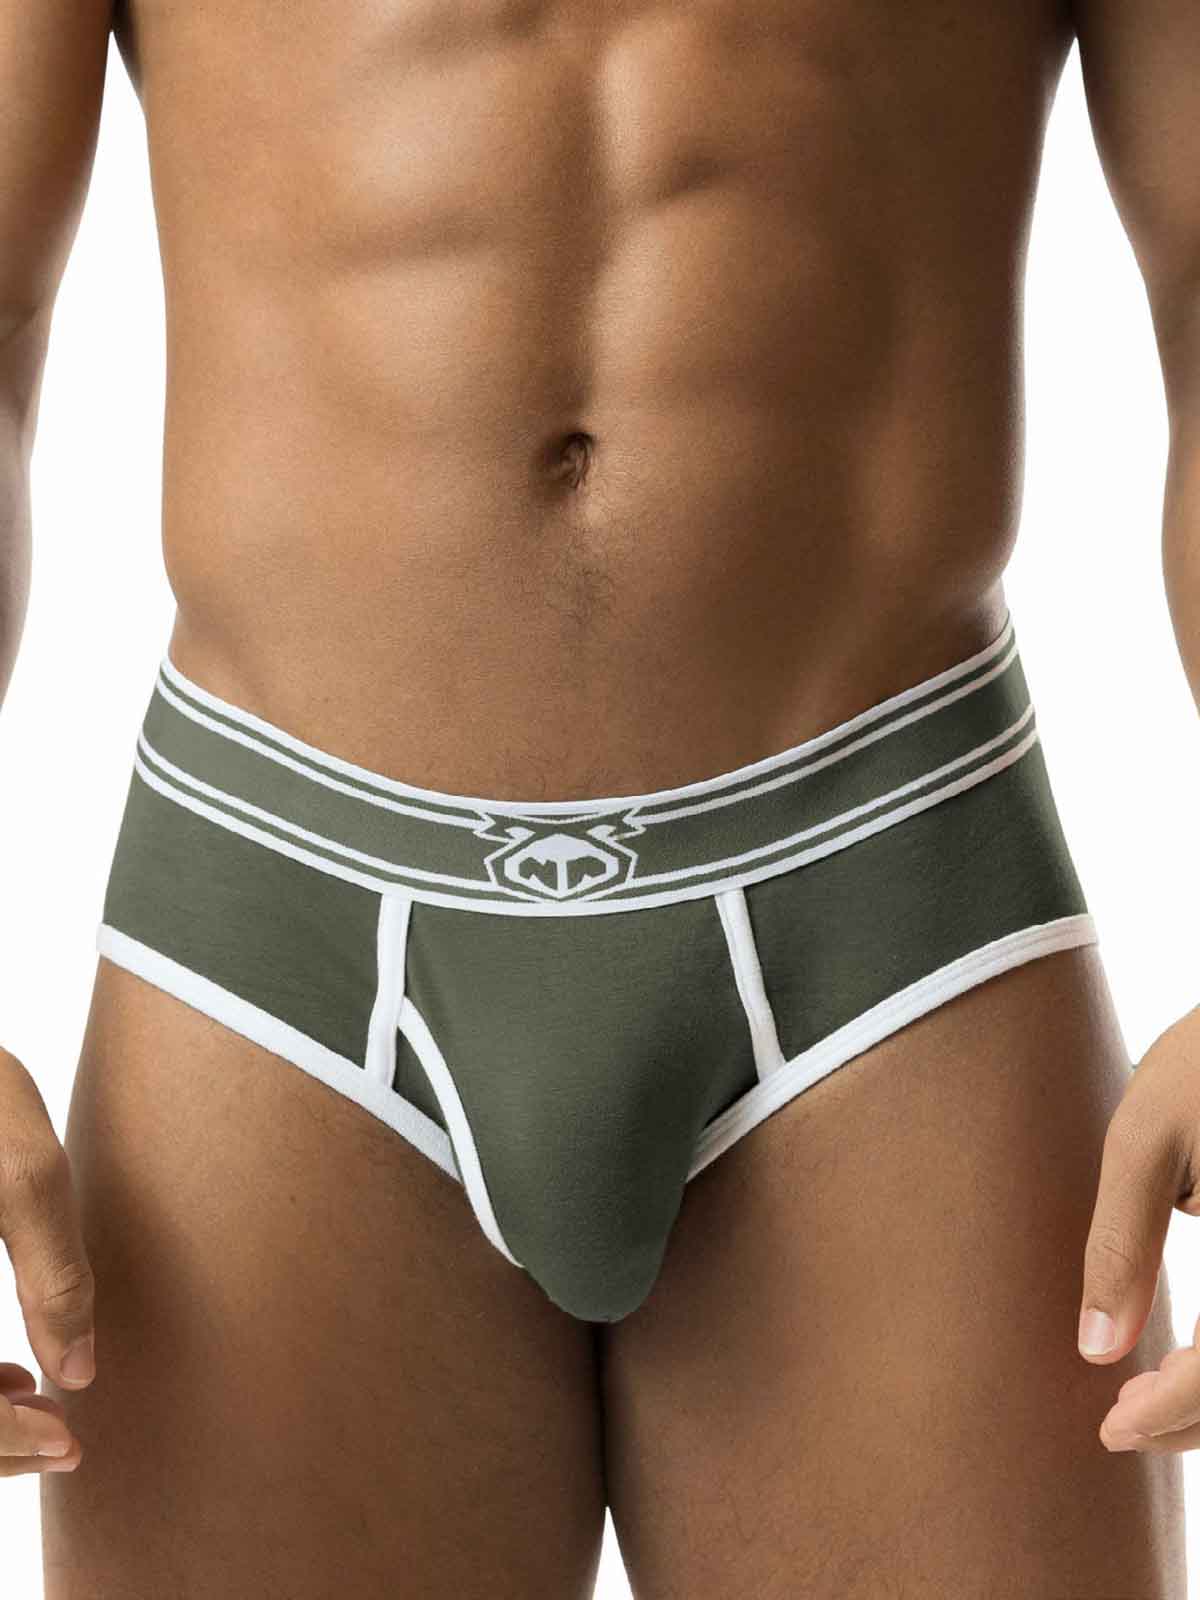 NASTY PIG CORE Y-FRONT BRIEF ARMY GREEN  - FullKit.com